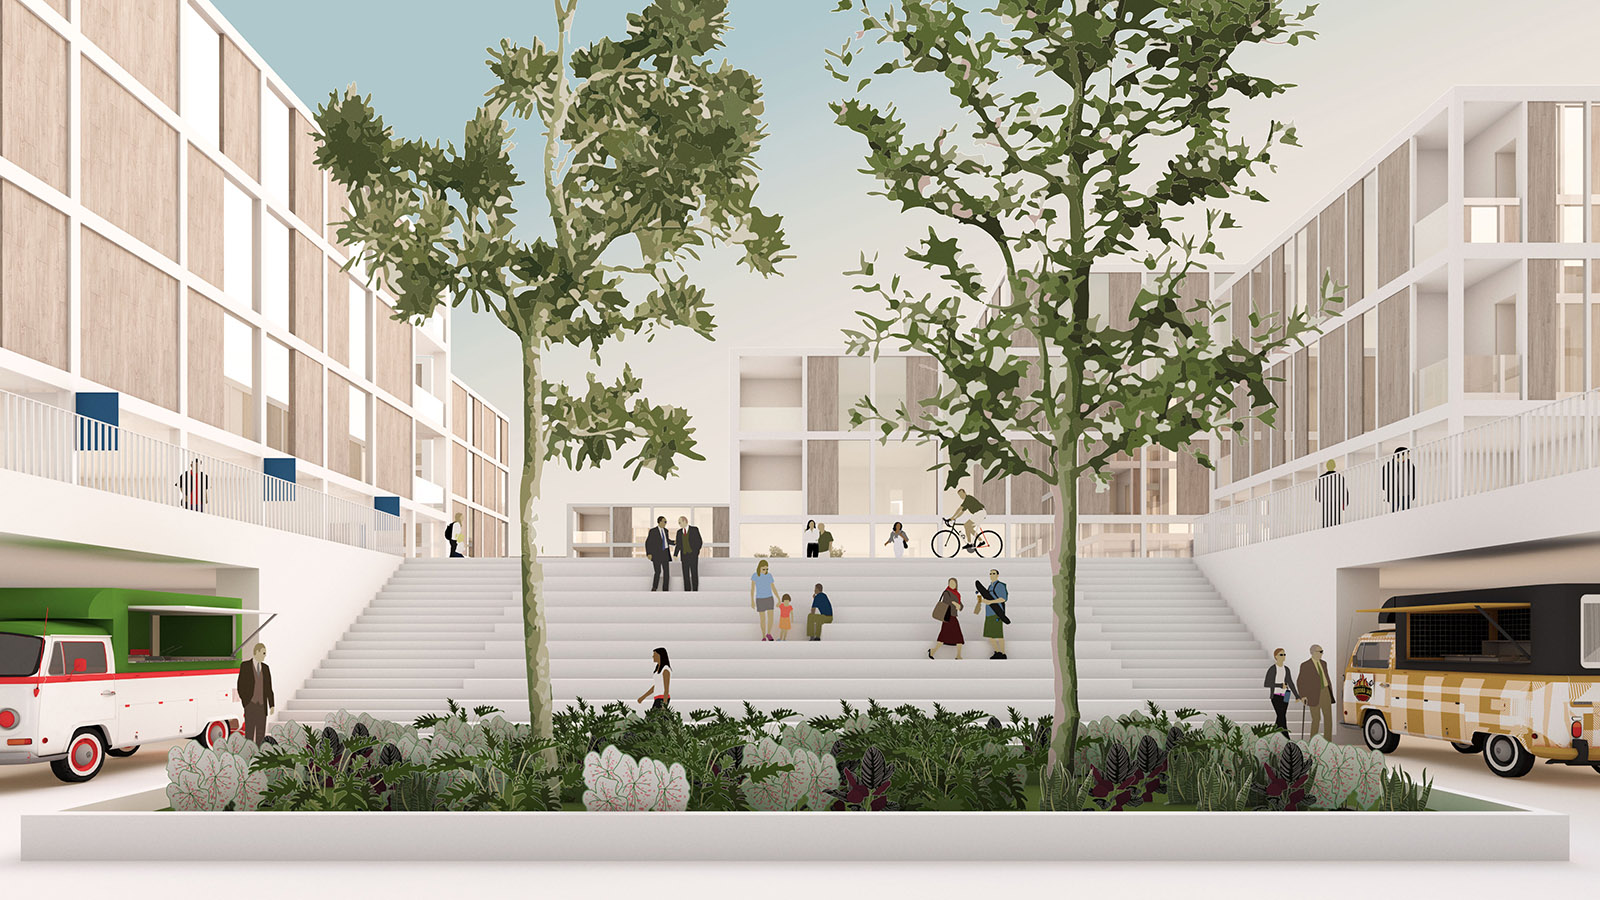 Rendering of plaza stairs with planters and trees in the foreground